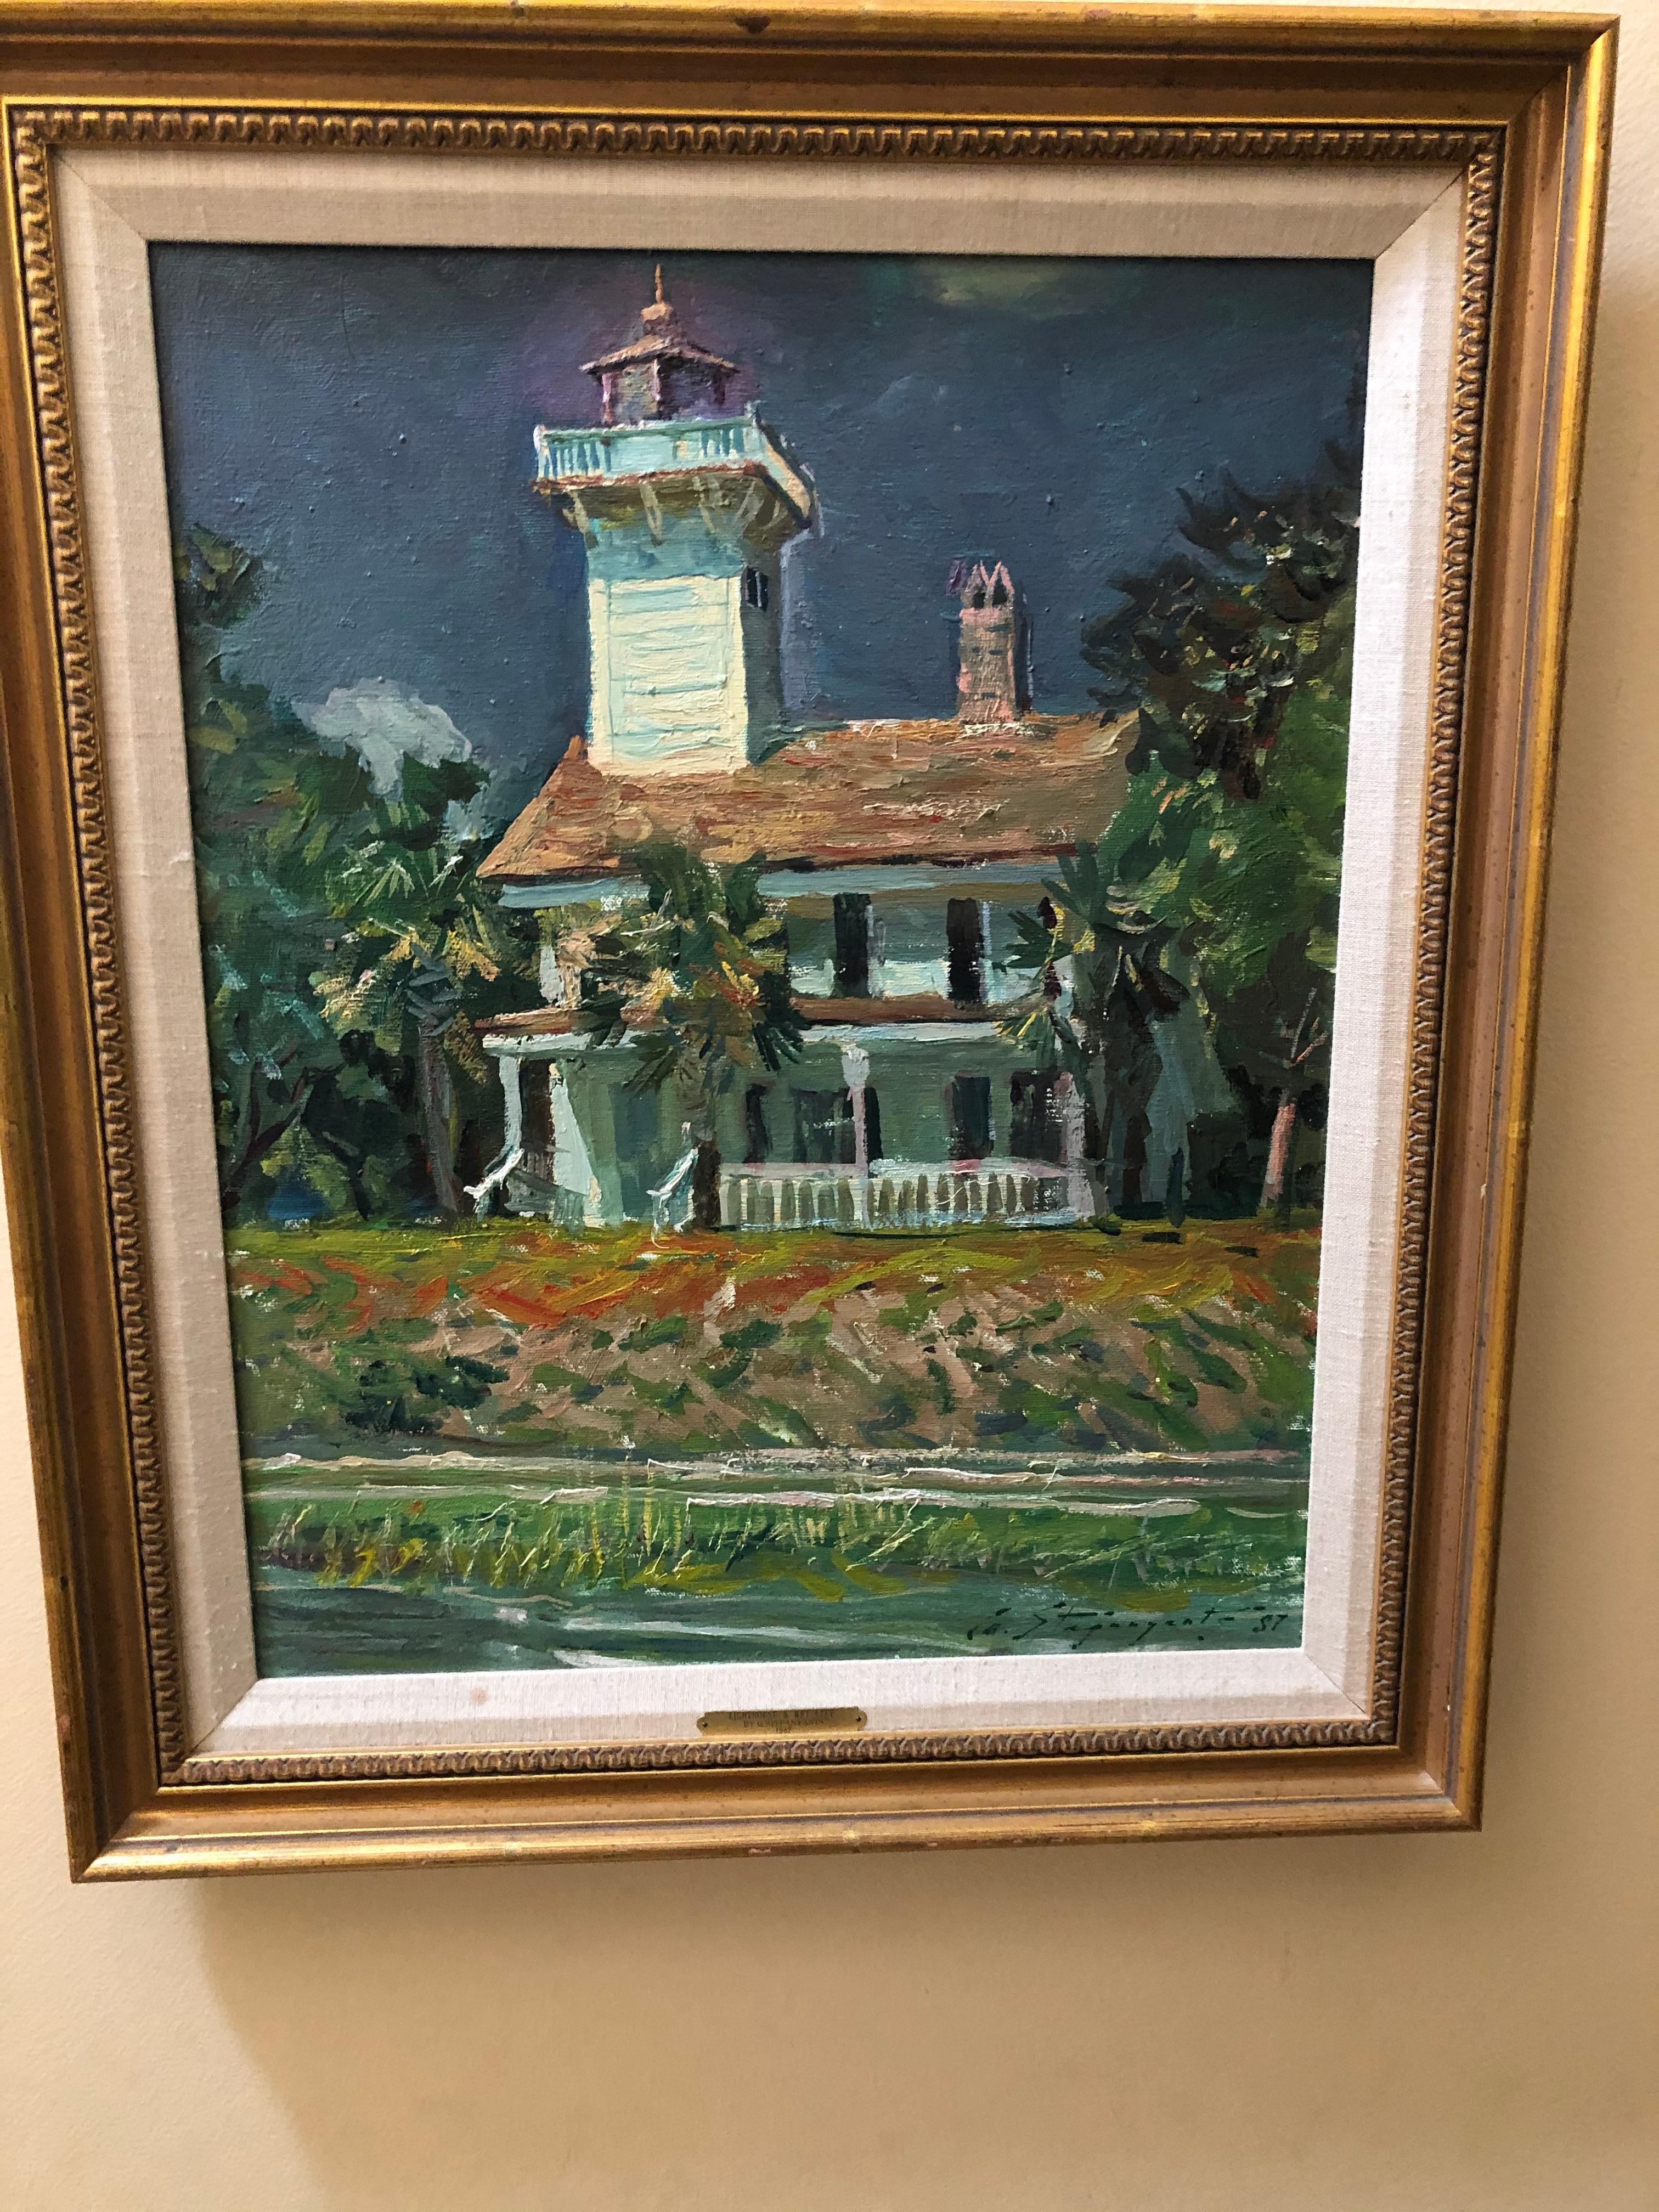 Grigory Stepanyants  Hilton Head Island Lighthouse - Painting by Unknown